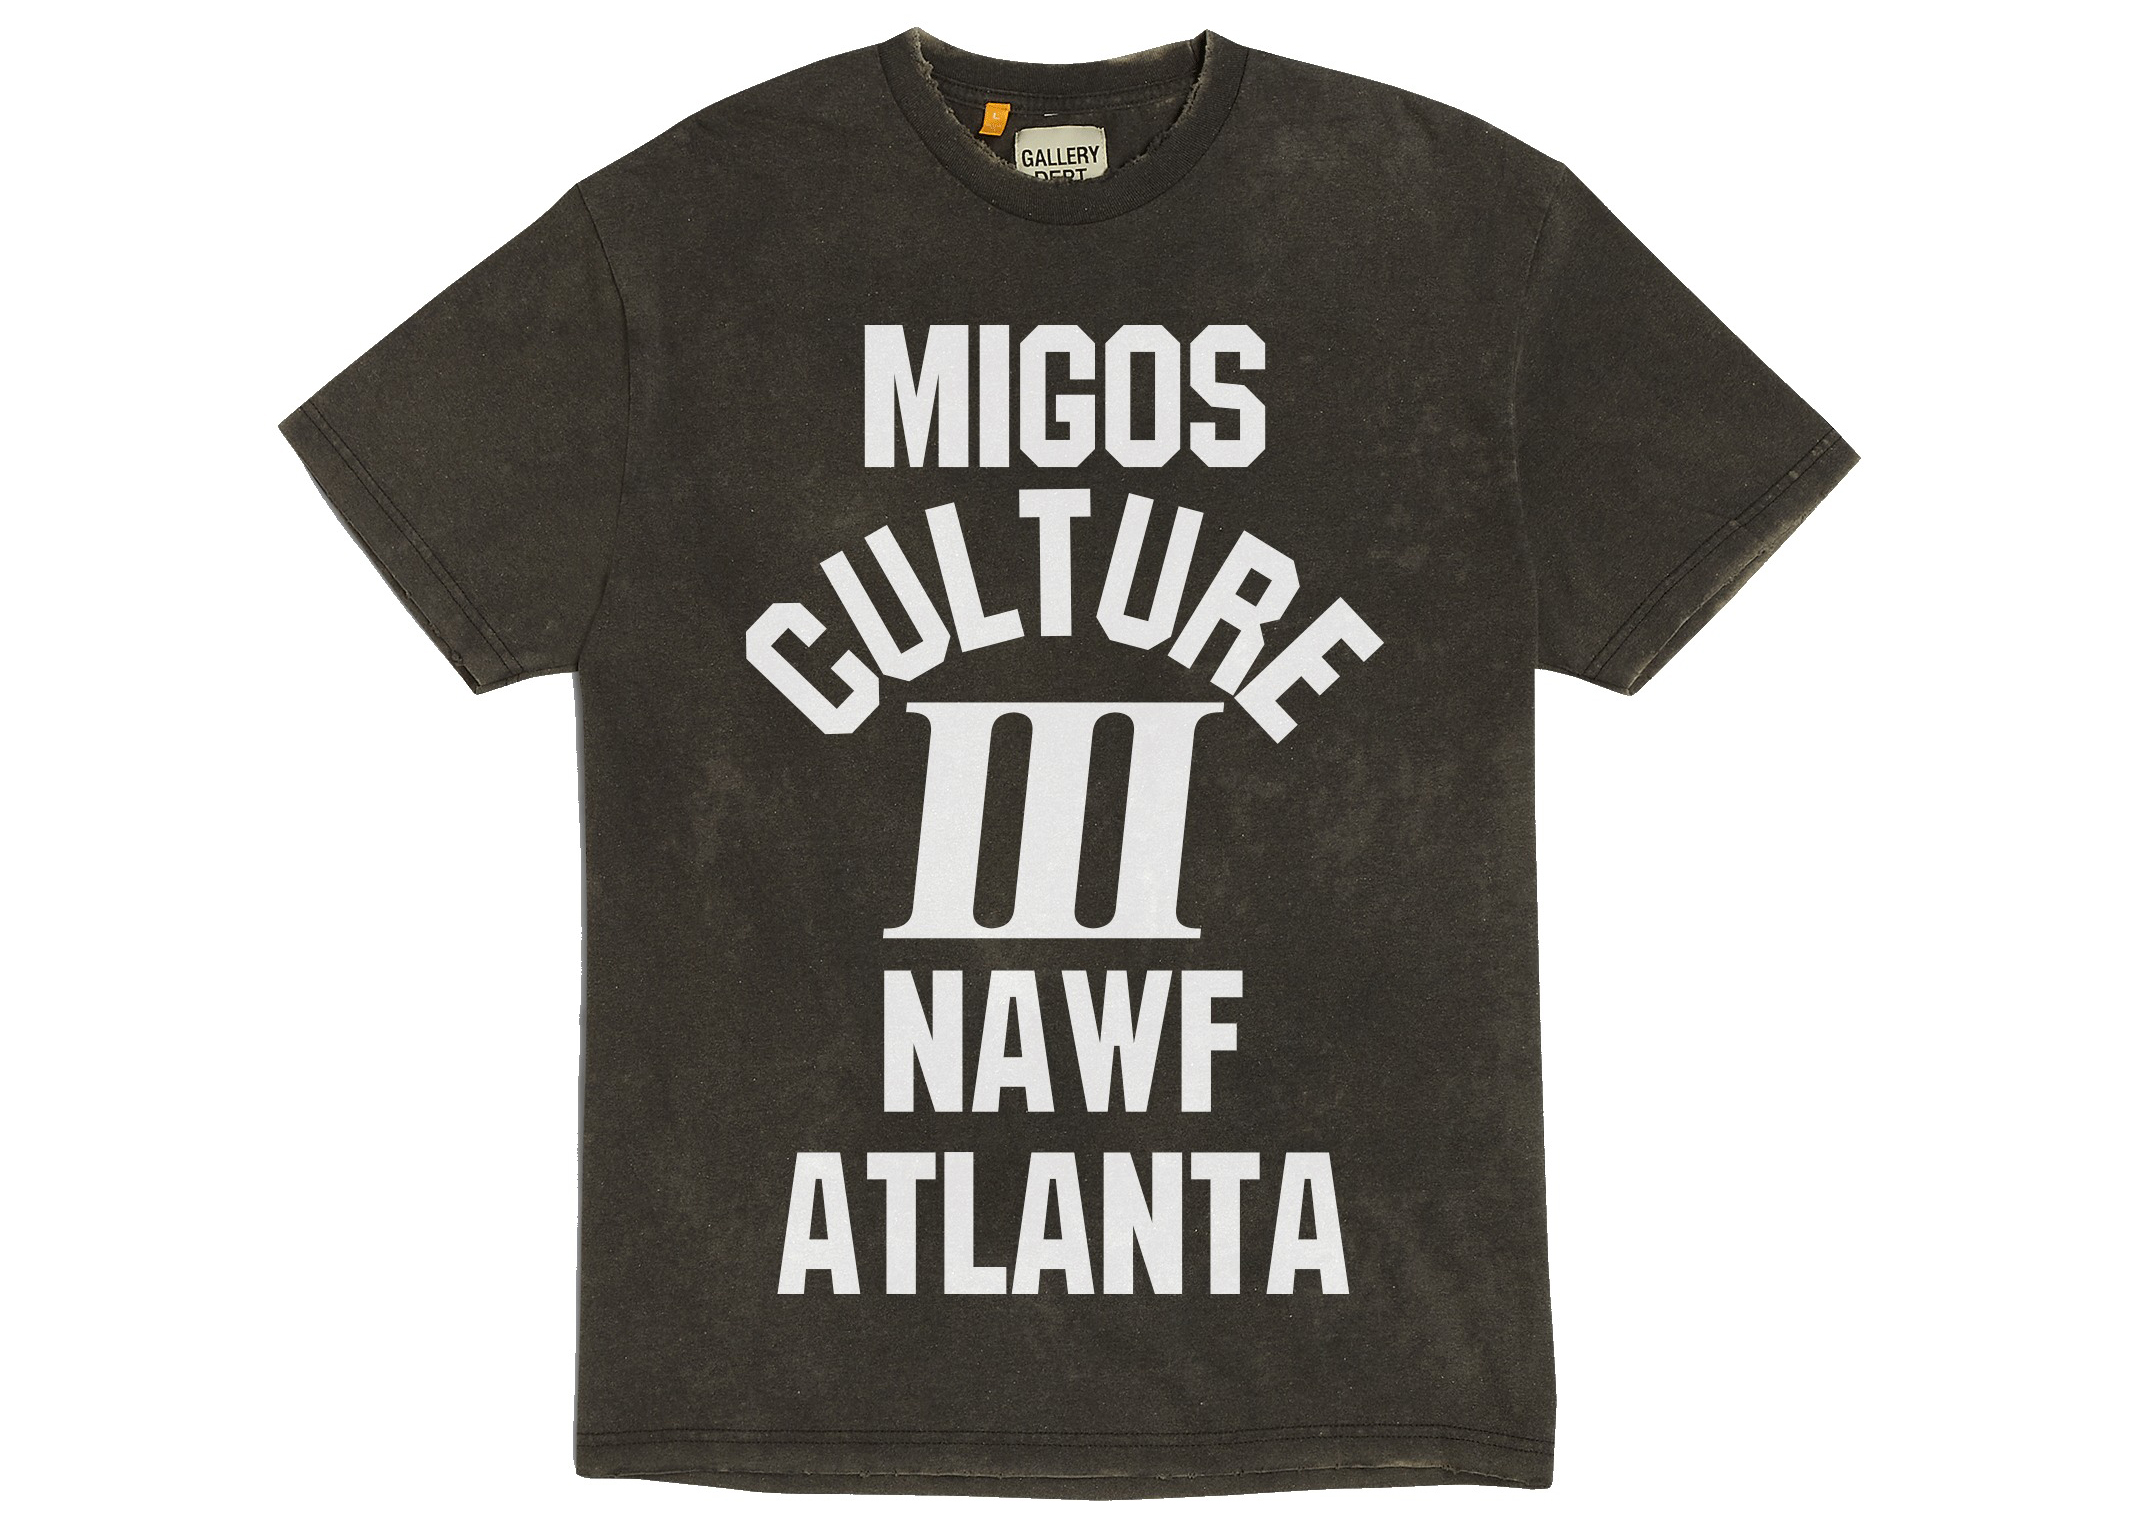 Migos x Gallery Dept. For Culture III YRN T-shirt Washed Black